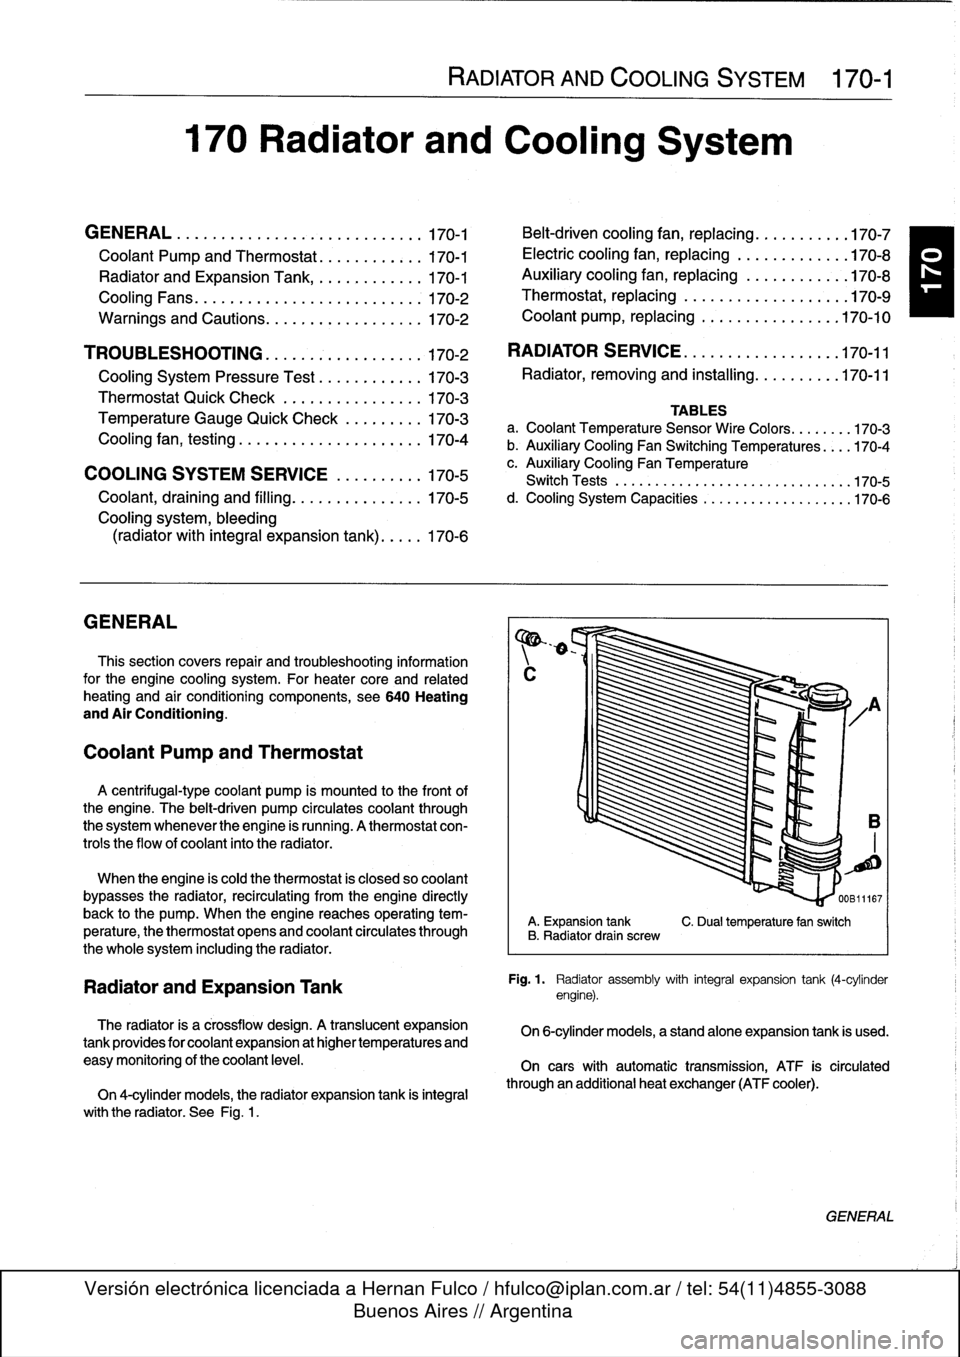 BMW 318i 1997 E36 Workshop Manual 170
Radiator
and
Cooling
System

GENERAL
.
.
.....
.
...
.
.
.
.
.
....
.
.
.
.
.
.
.
.170-1

Coolant
Pump
and
Thermostat
........
.
.
.
.
170-1

Radiator
and
Expansion
Tank
.........
.
...
170-1

Coo